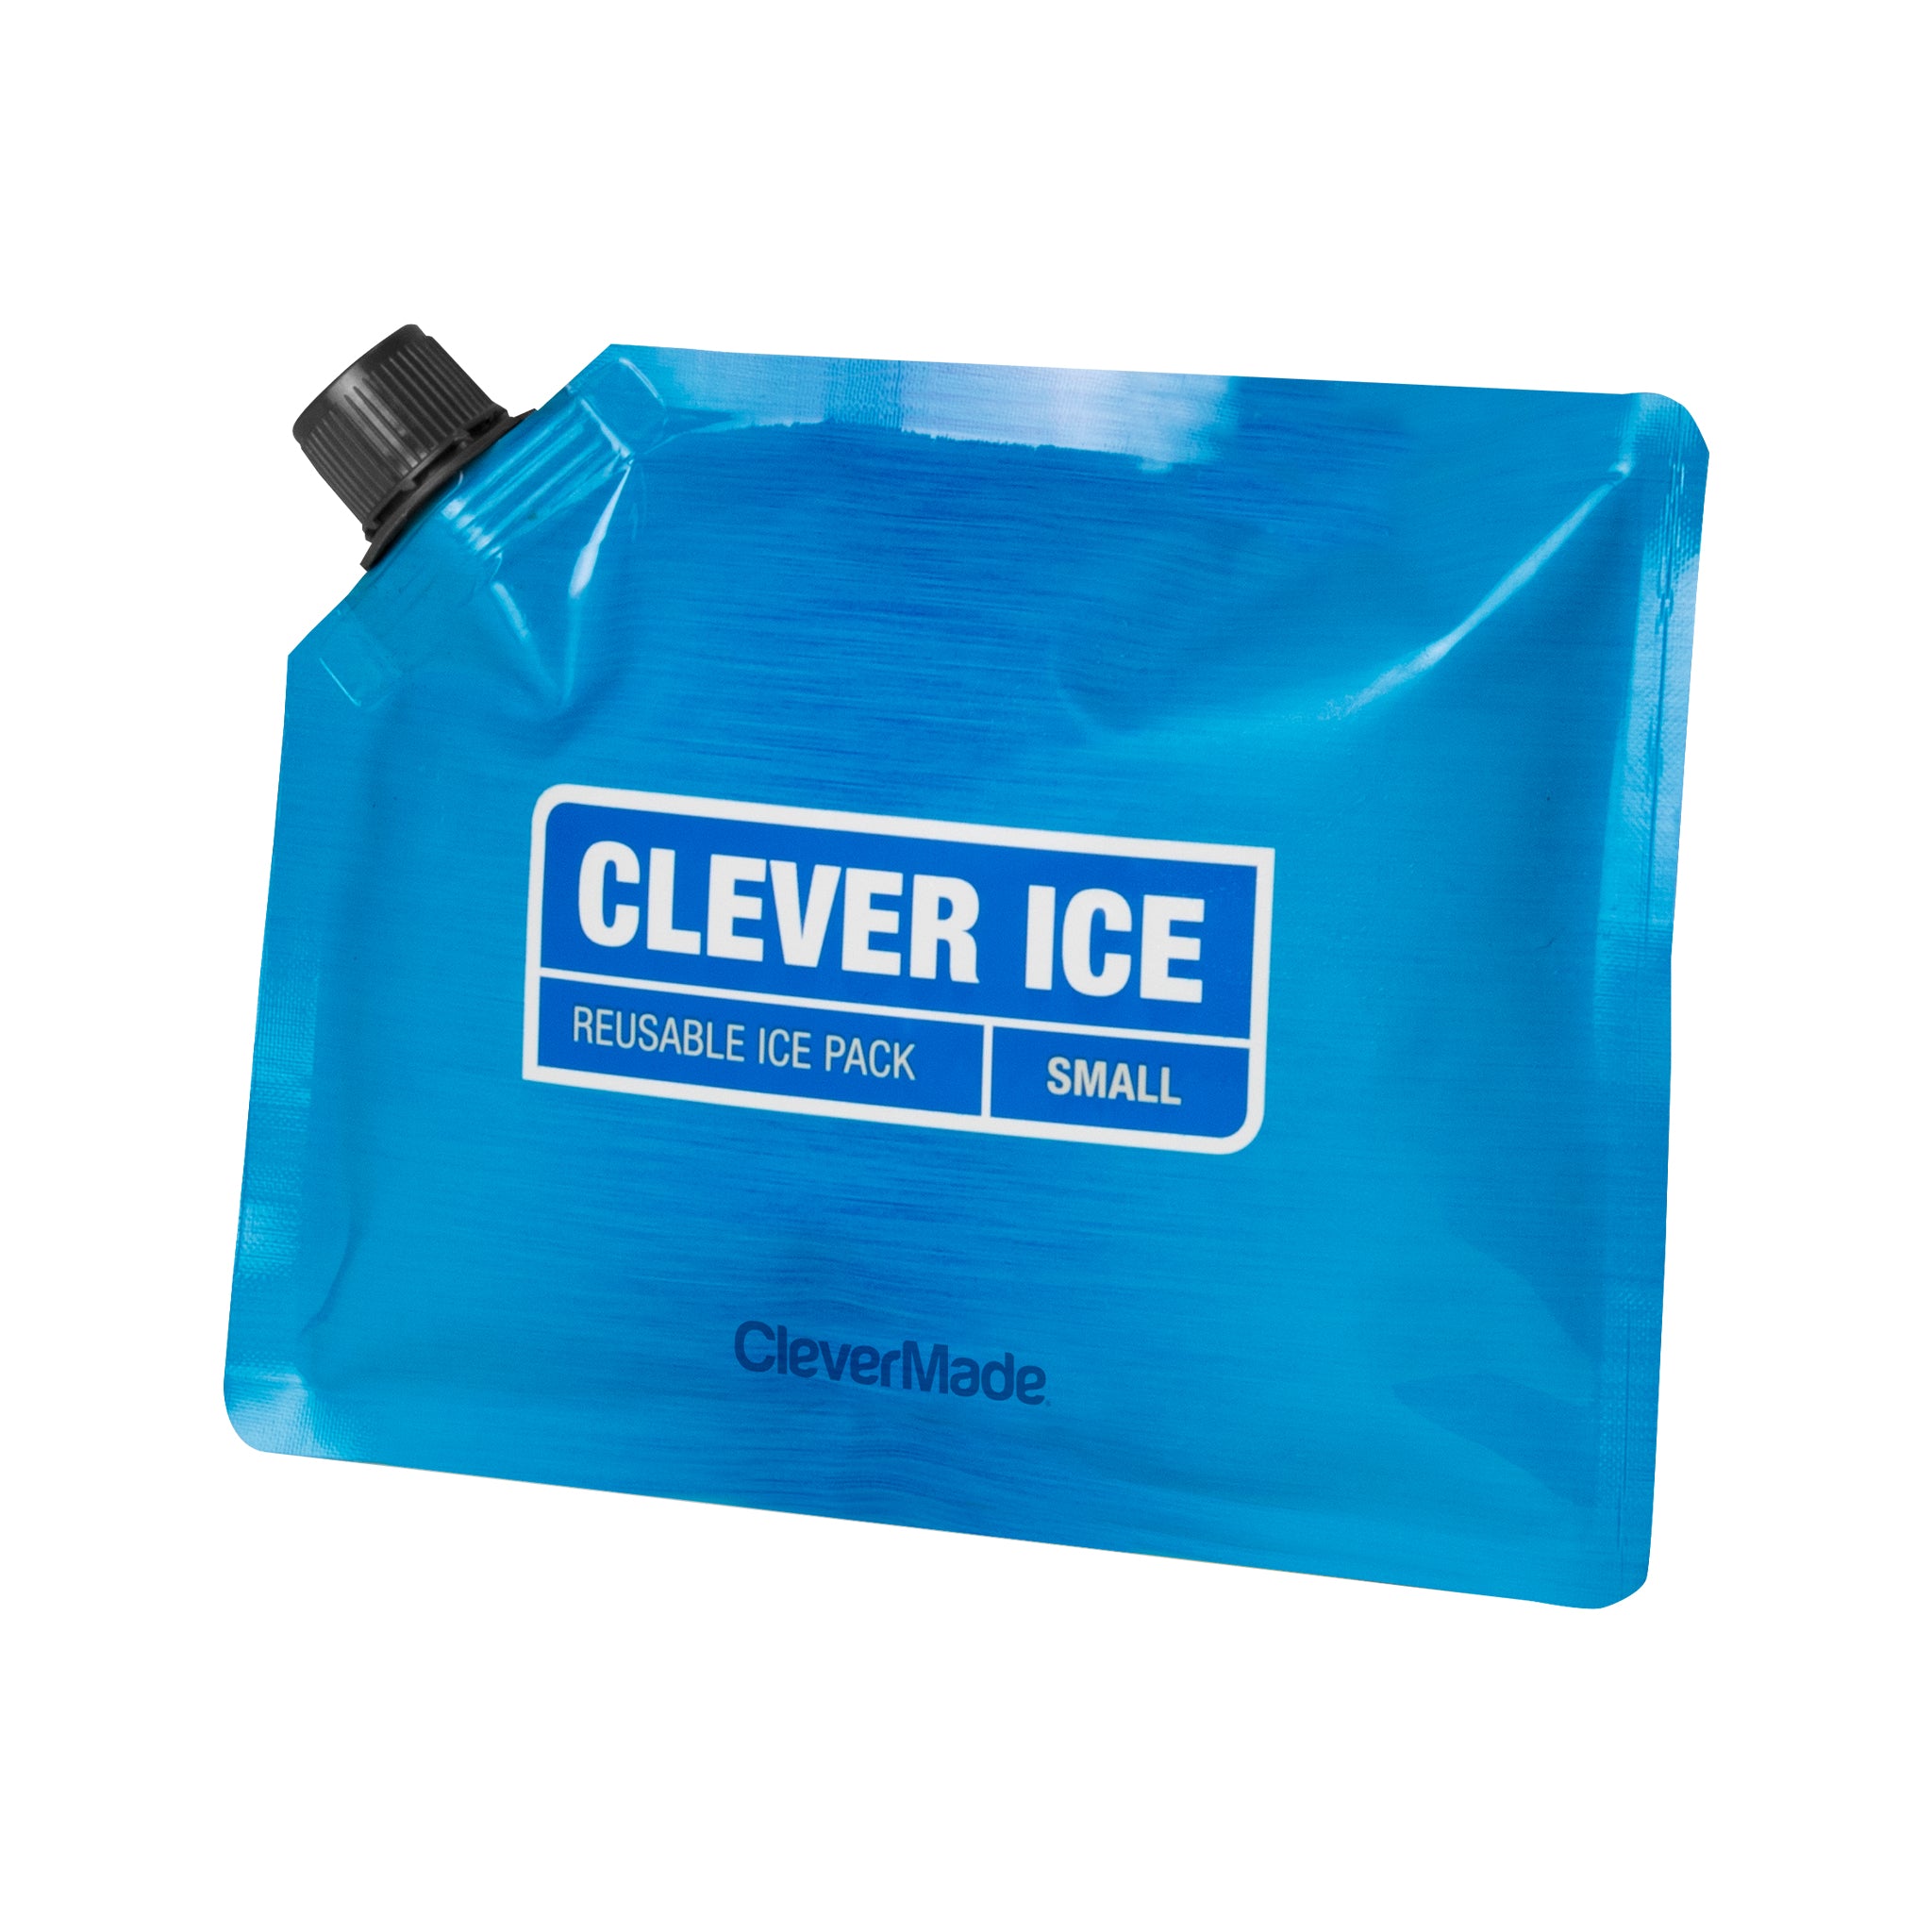 6 x Ice Packs for Lunch Box and Lunch Coolers - [Long Lasting] Freezer Blocks (3 x Large, 3 x Small) Cold - [Reusable] and Great for Kids School